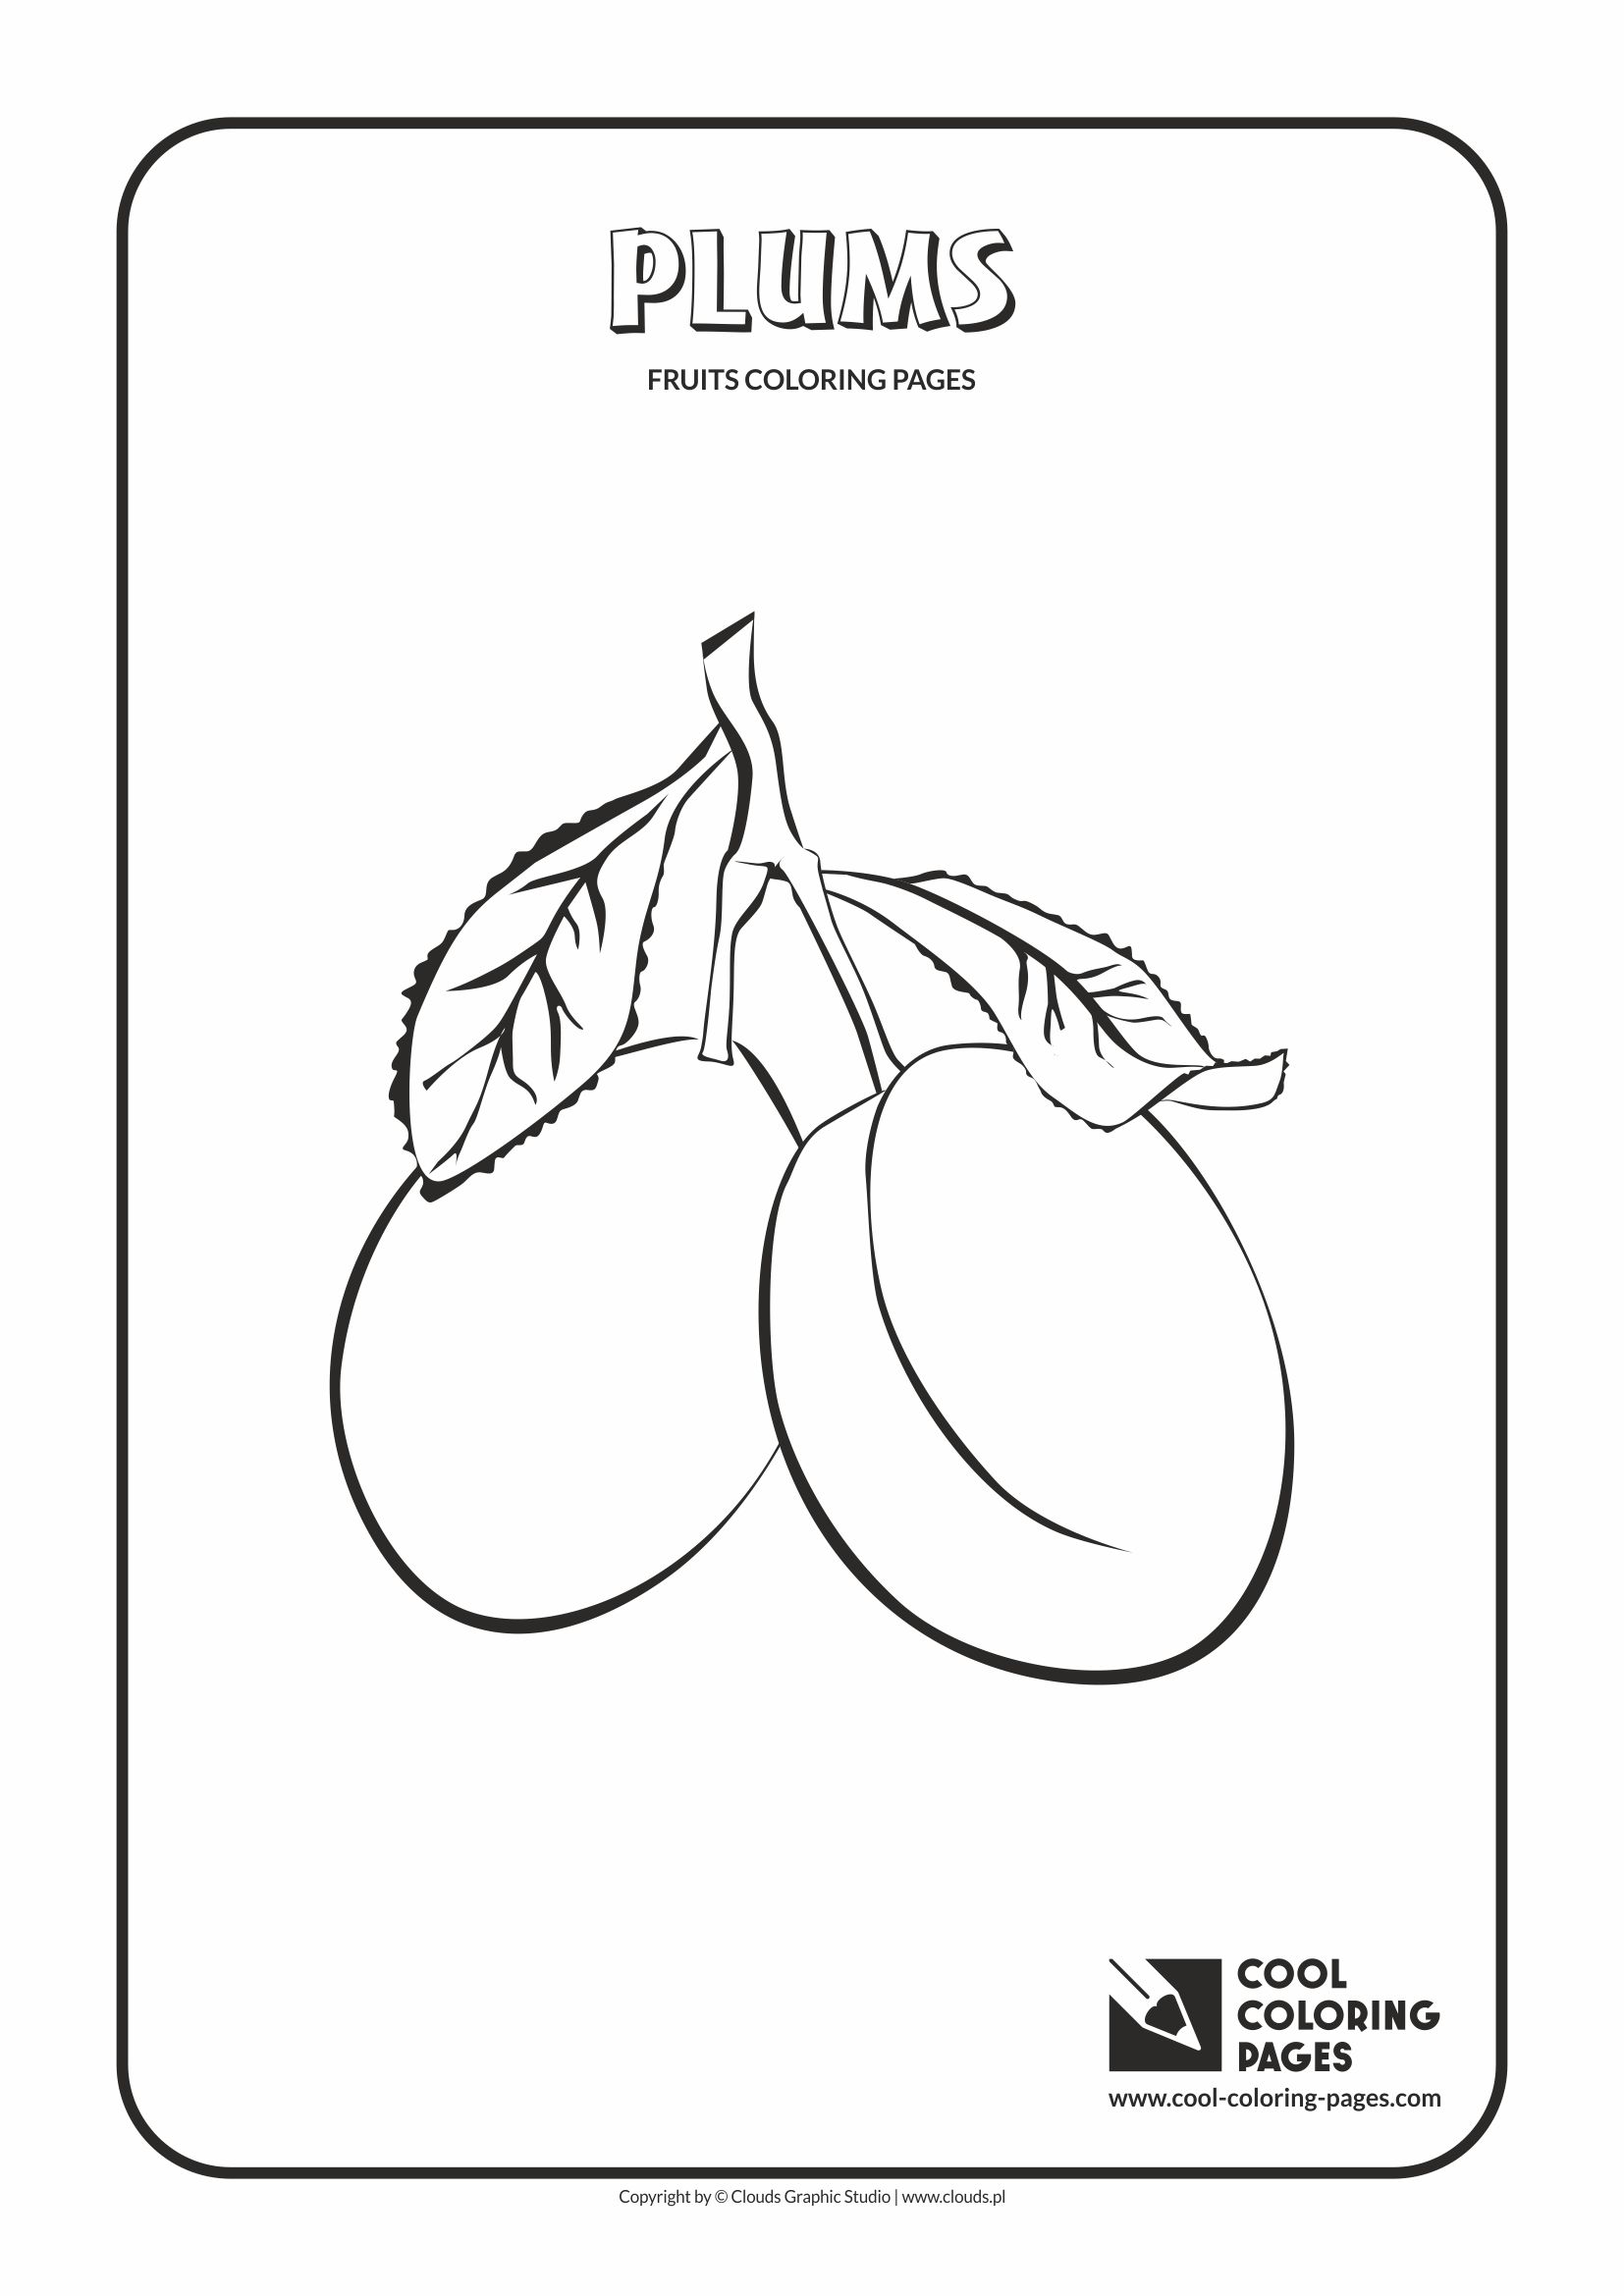 Cool Coloring Pages - Plants / Plums / Coloring page with plums